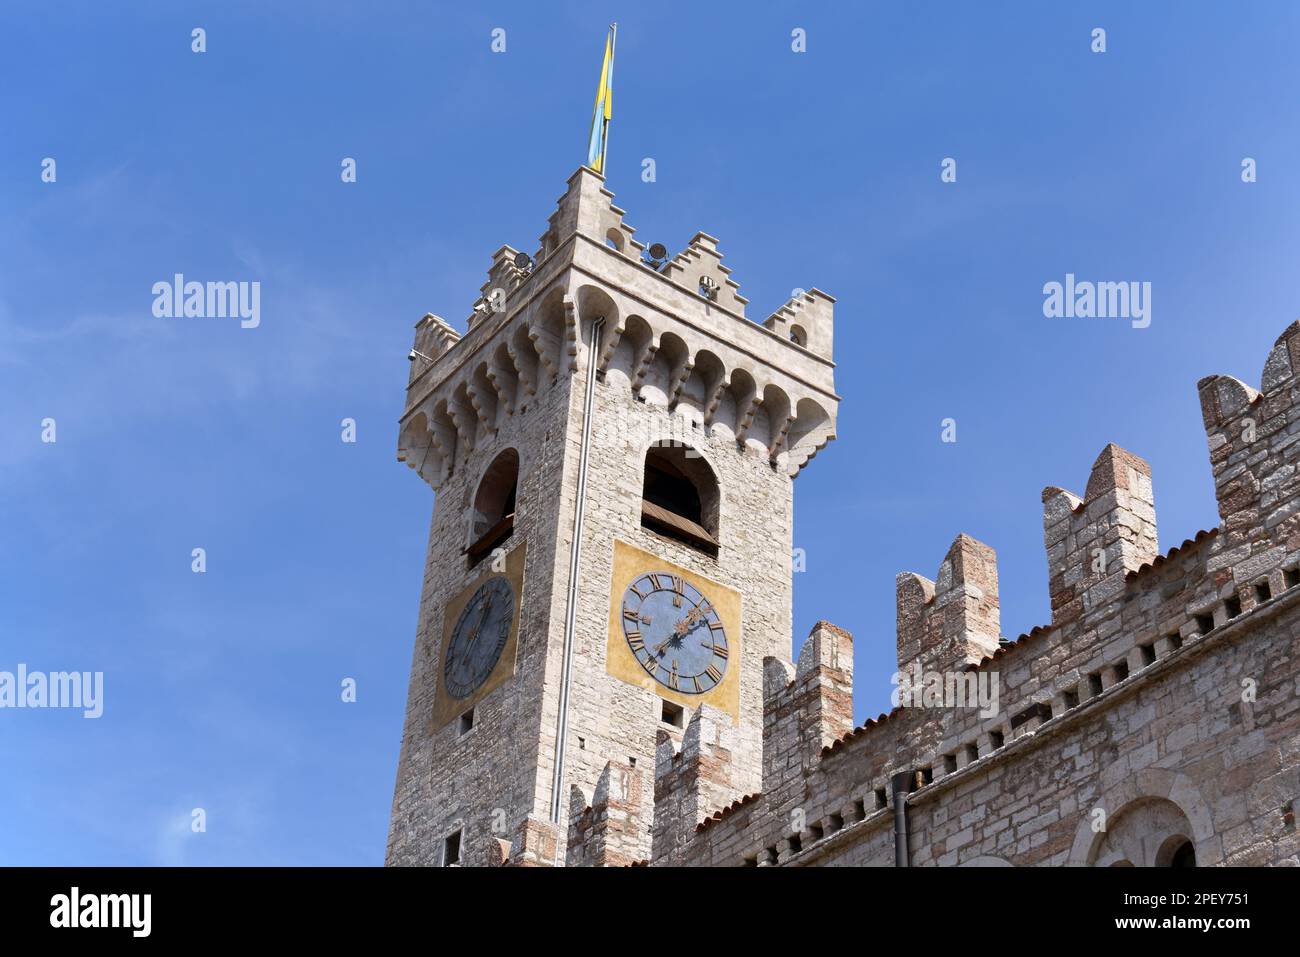 The civic tower of Trento stands in the main square of the town, Piazza Duomo. This 43 metres high limestone tower was built in 1150 to defend the tow Stock Photo